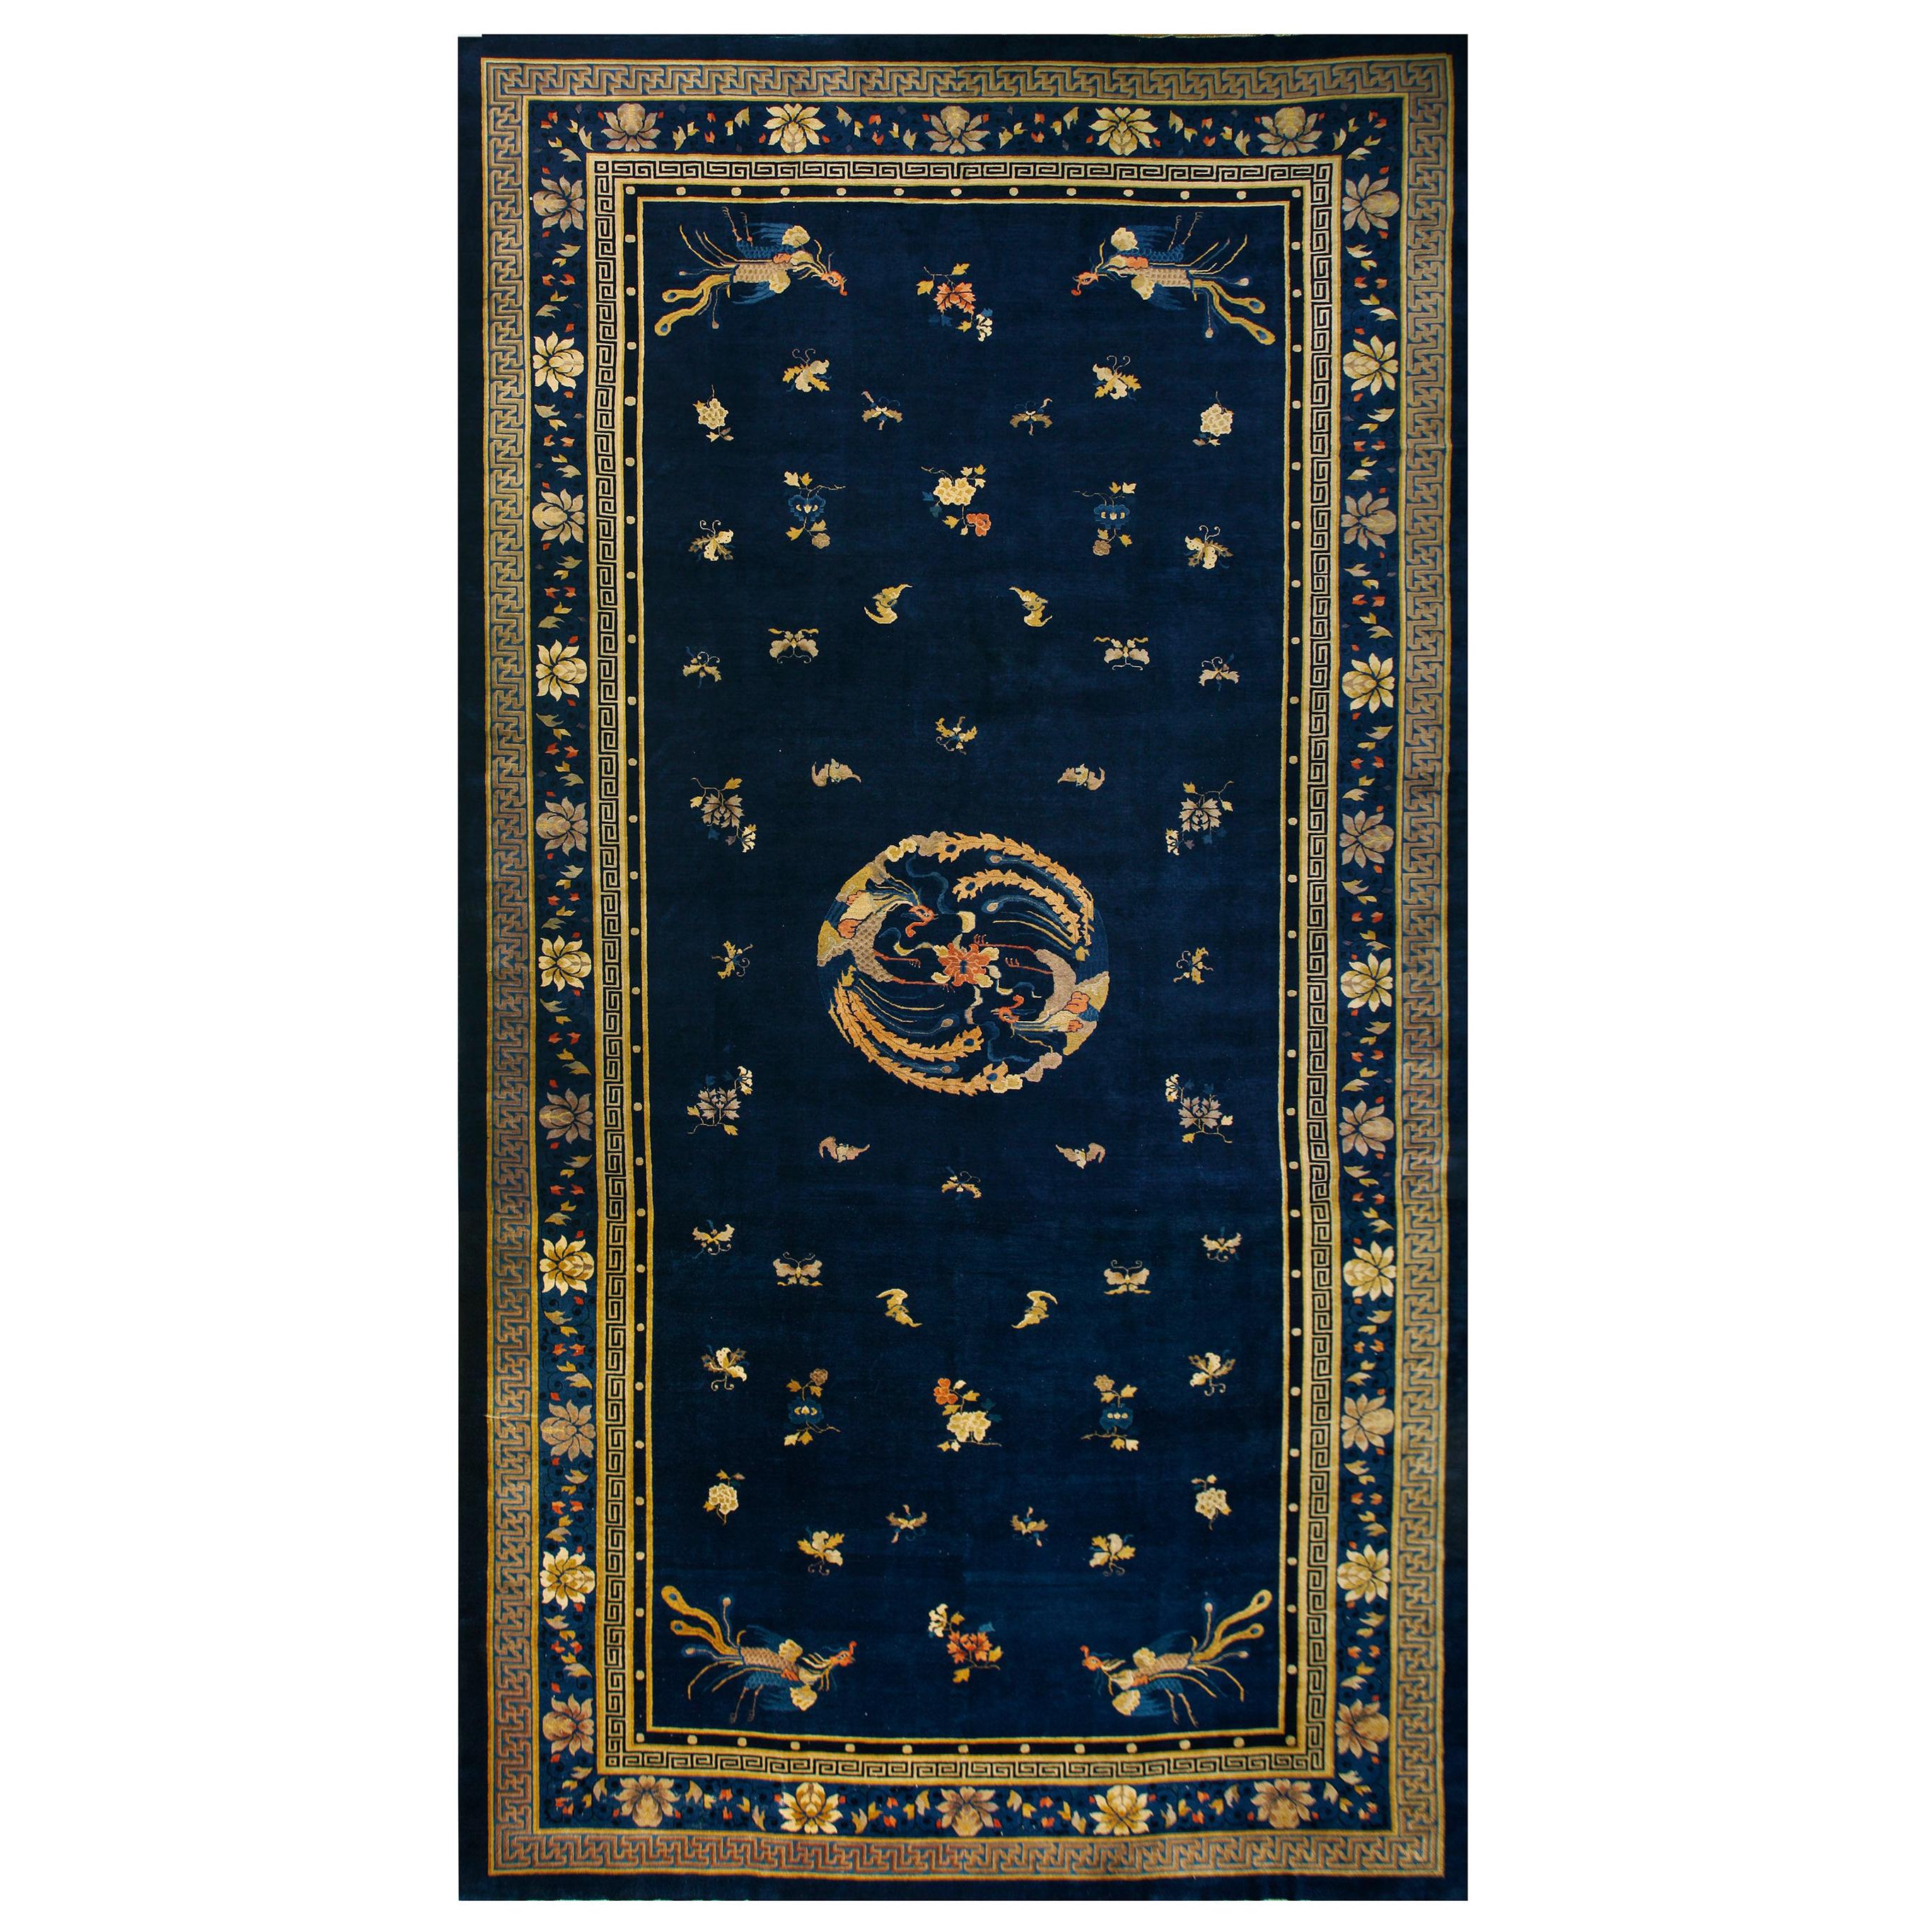 Late 19th Century Chinese Peking Carpet ( 12'2" x 22'8" - 370 x 690 cm  ) For Sale